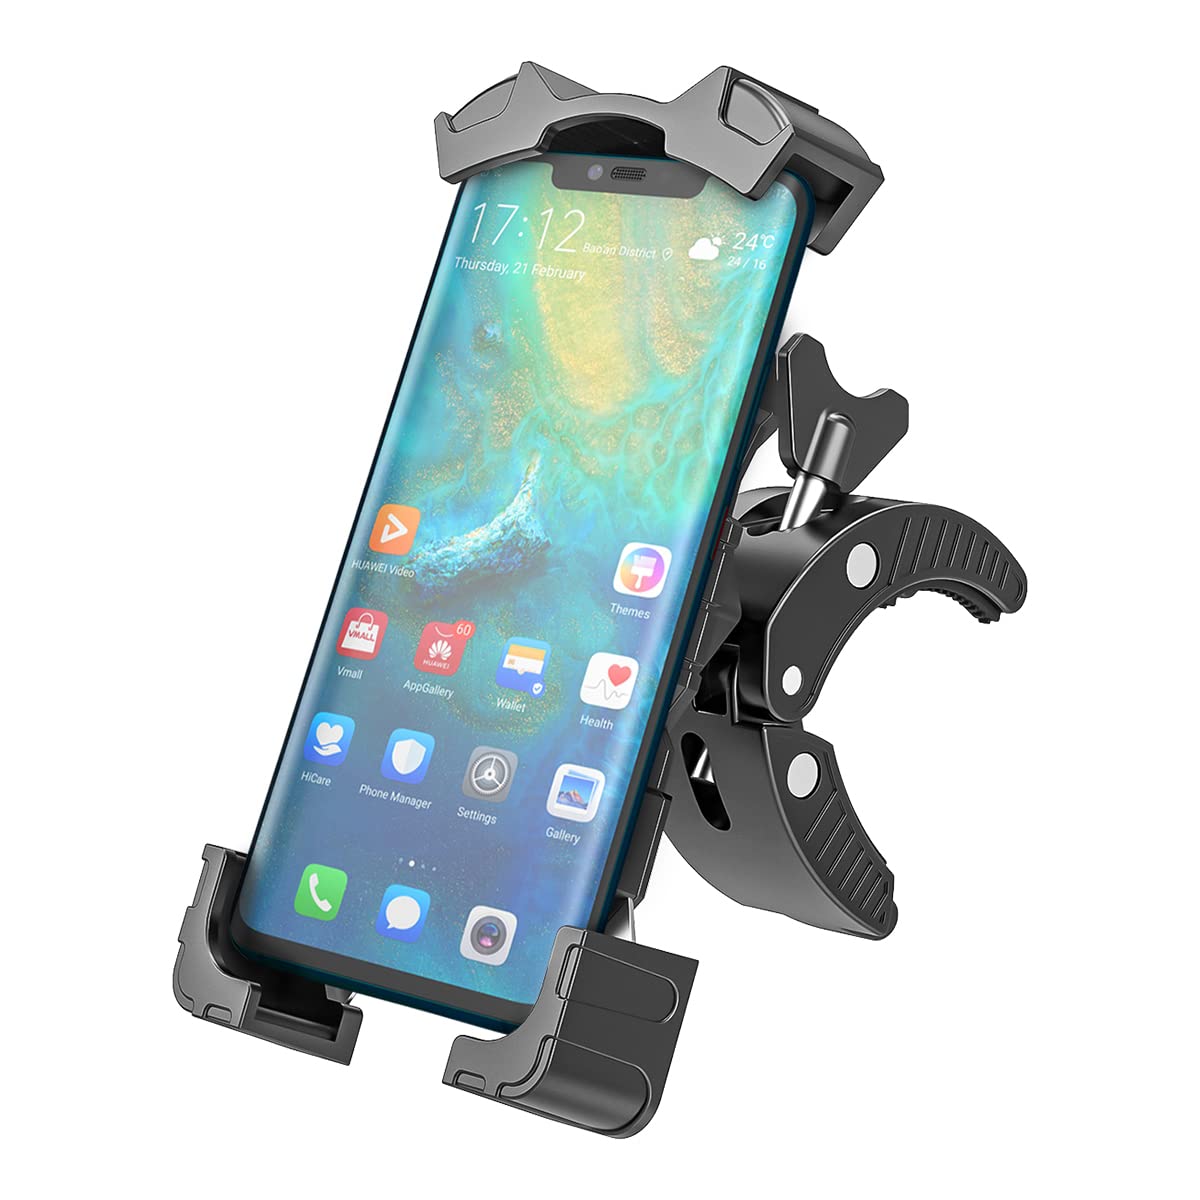 Bike Phone Holder Mount, Bicycle and Motorcycle Handlebars Friendly, 360° Rotation Easy Install and Quick Release Cellphone Holder, Universal for iphone Pro/Max/XS, Samsung Galaxy S21, Note20